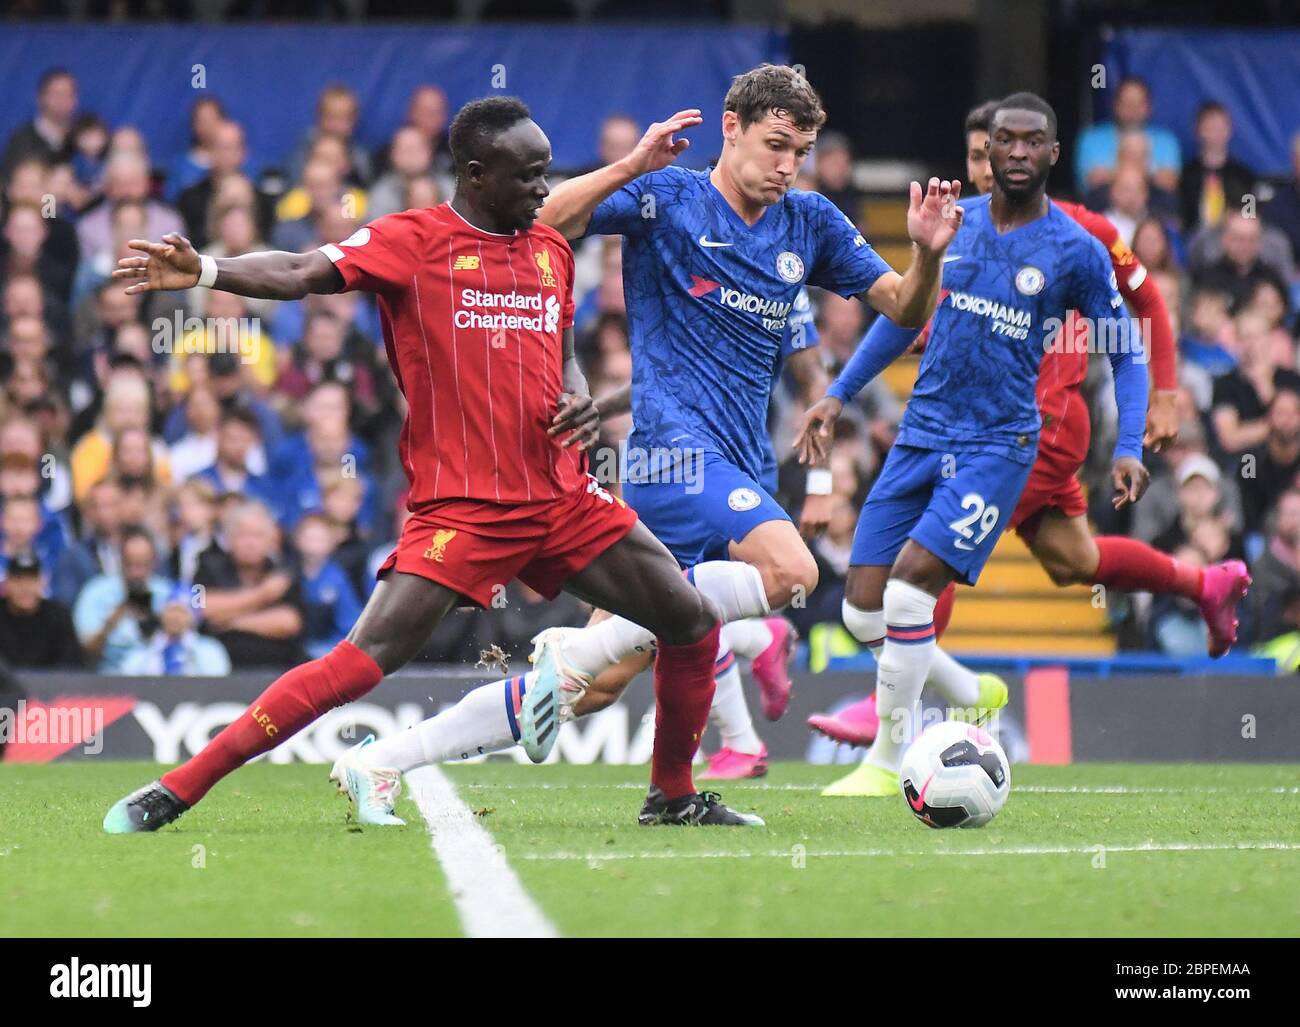 LONDON, ENGLAND - SEPTEMBER 22, 2019: Sadio Mane of Liverpool (L) and Andreas Christensen of Chelsea (R) pictured during the 2019/20 Premier League game between Chelsea FC and Liverpool FC at Stamford Bridge. Stock Photo